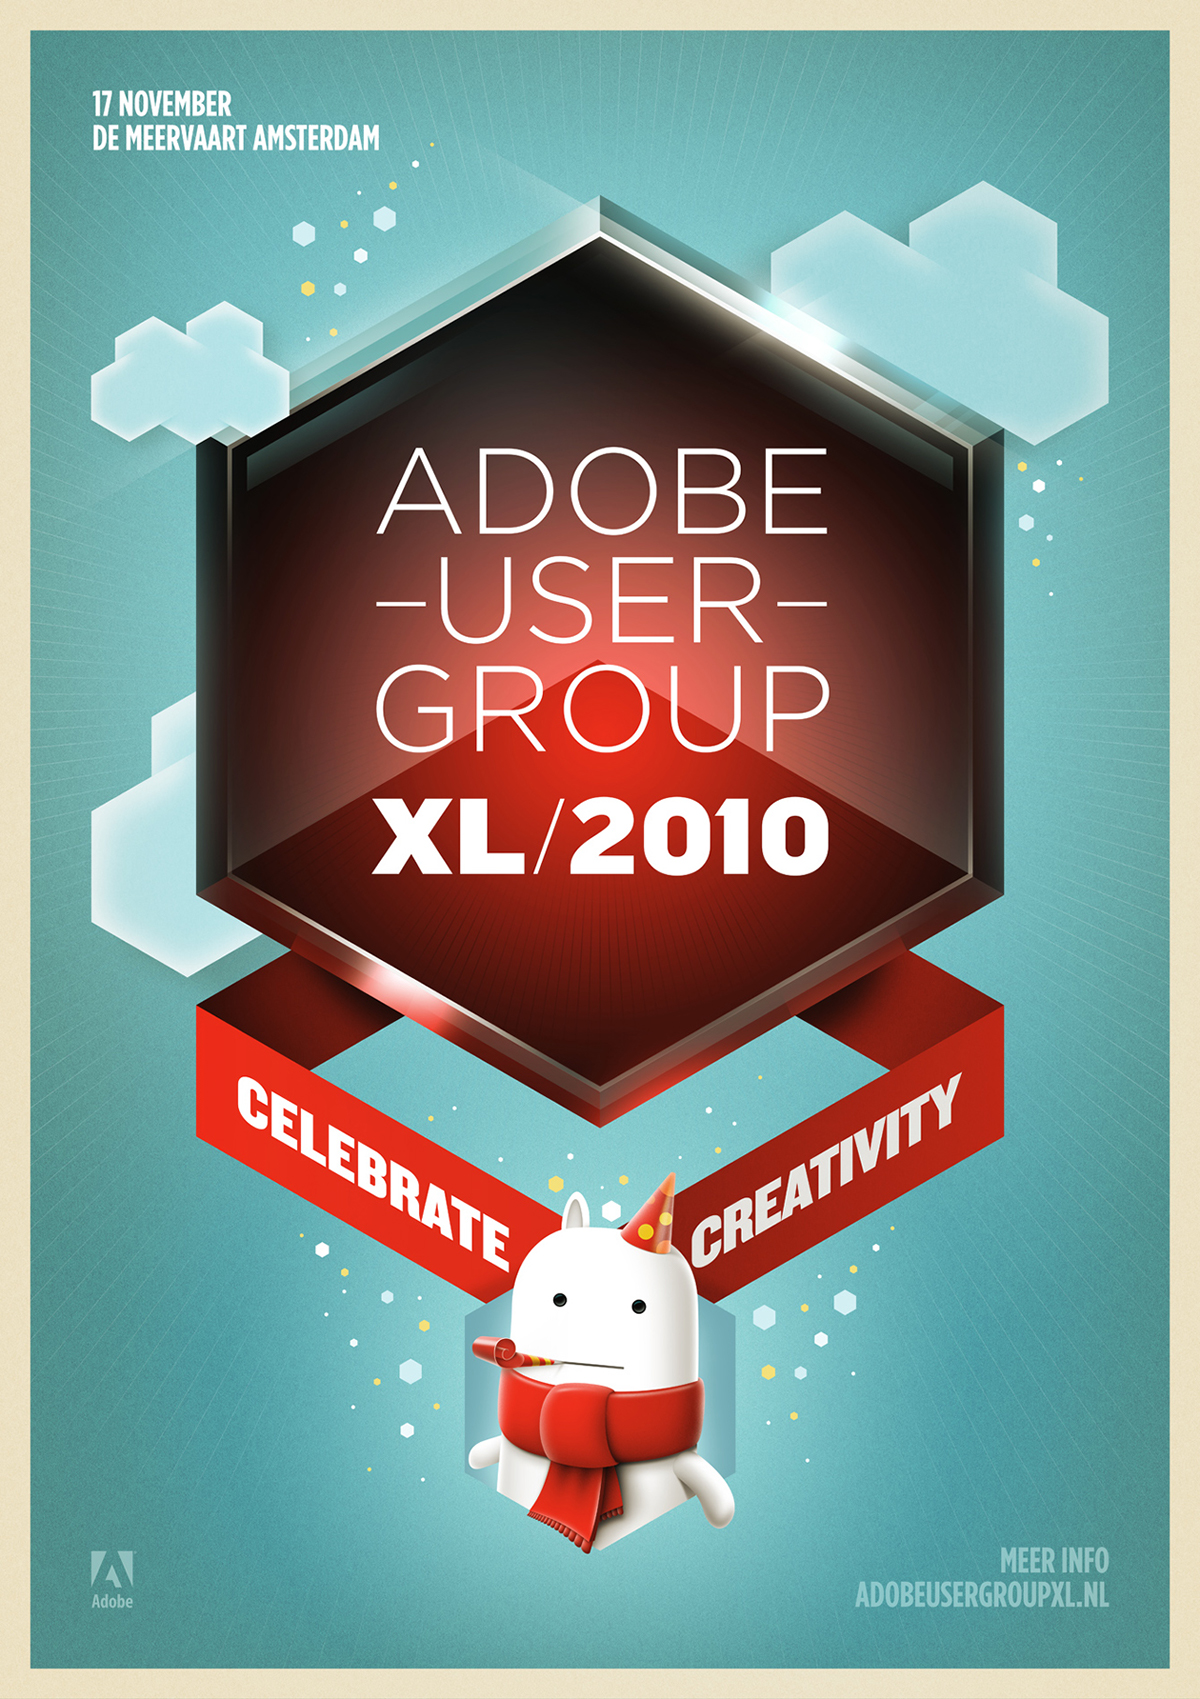 Adobe User Group Event xl identity amsterdam poster flyer Interface